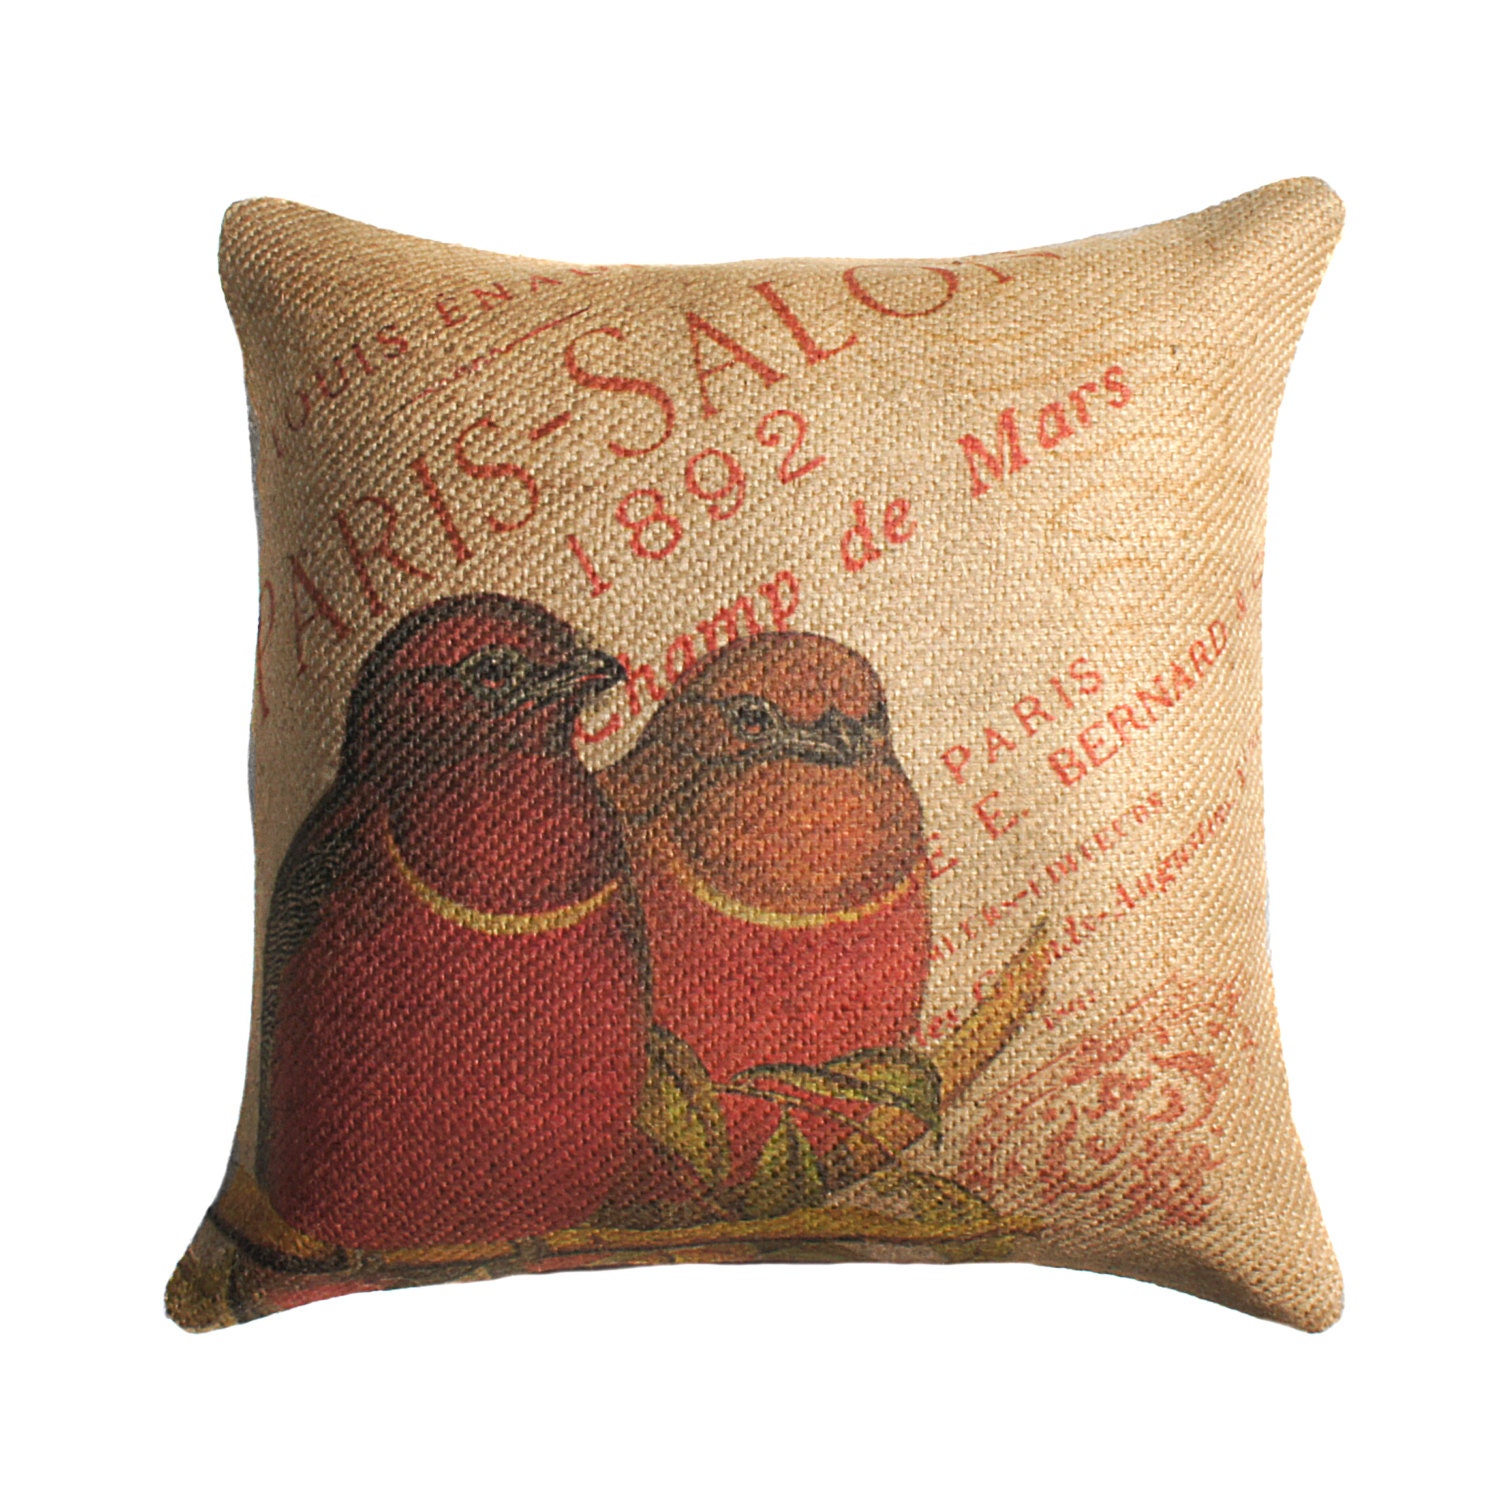 Burlap Pillow Cover of Red Birds, French Throw Pillow, Cushion Cover, Paris, 16 X 16